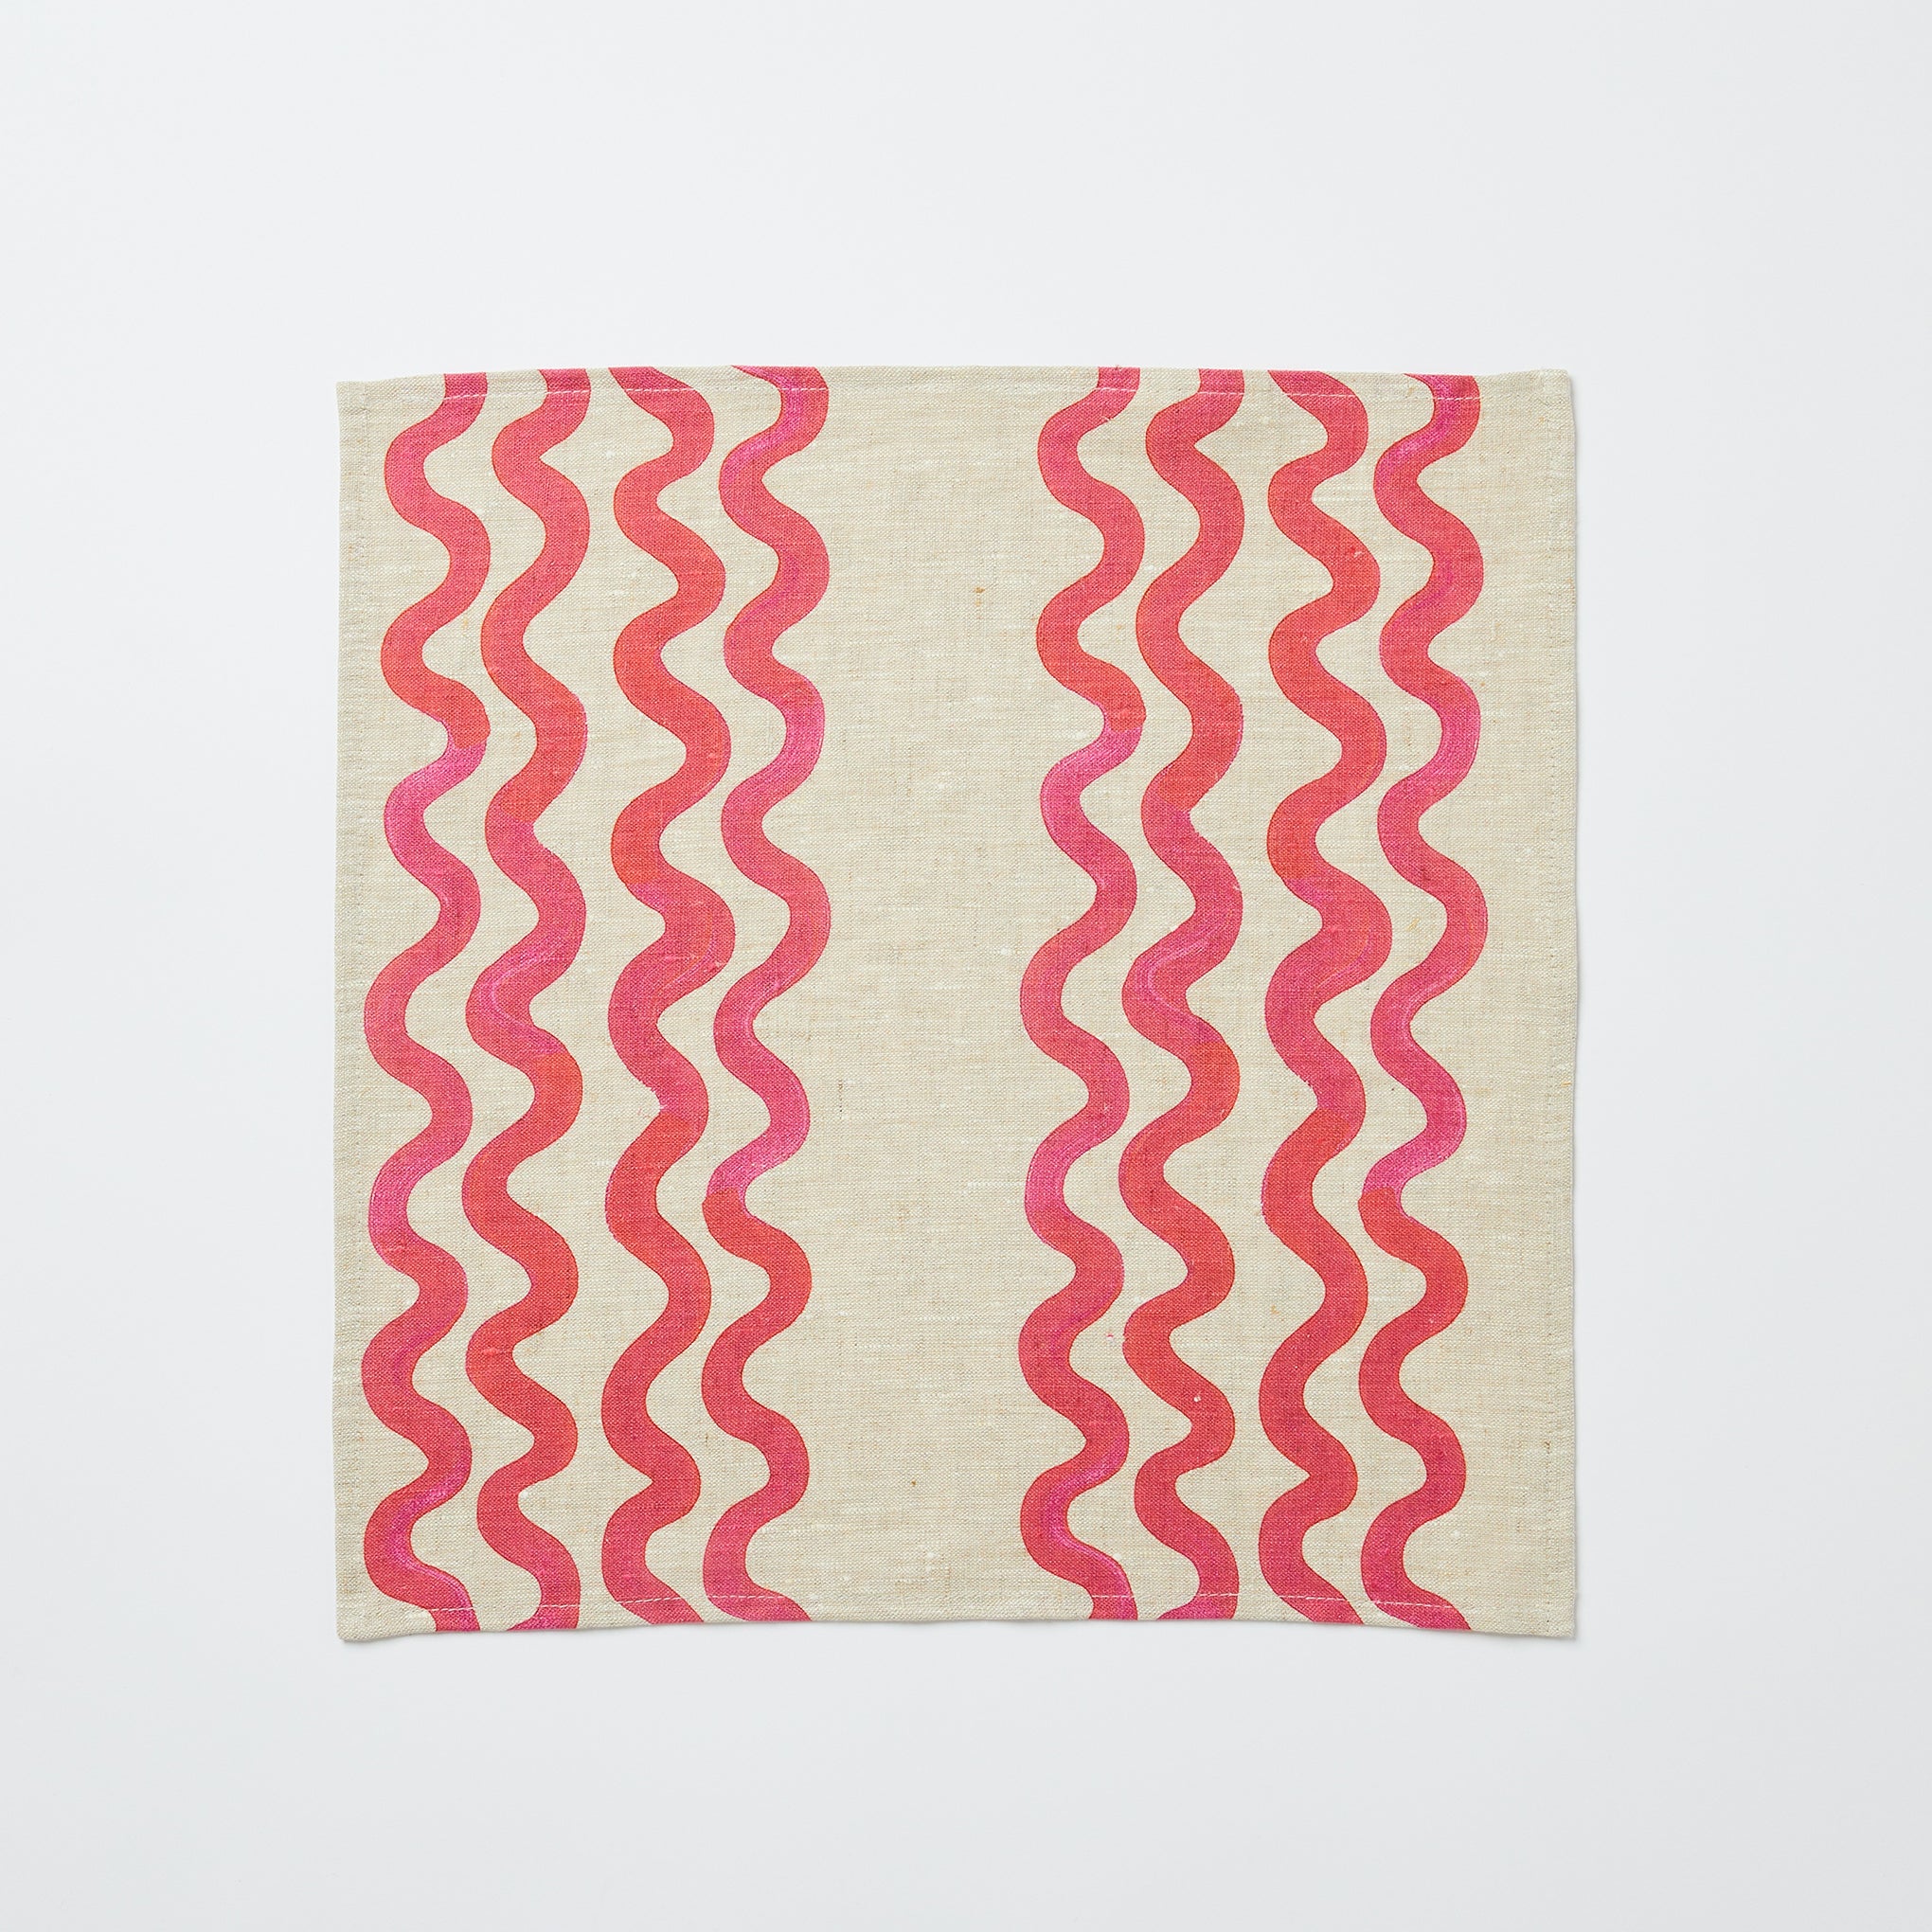 Double Waves Pink Napkins (set of 4)